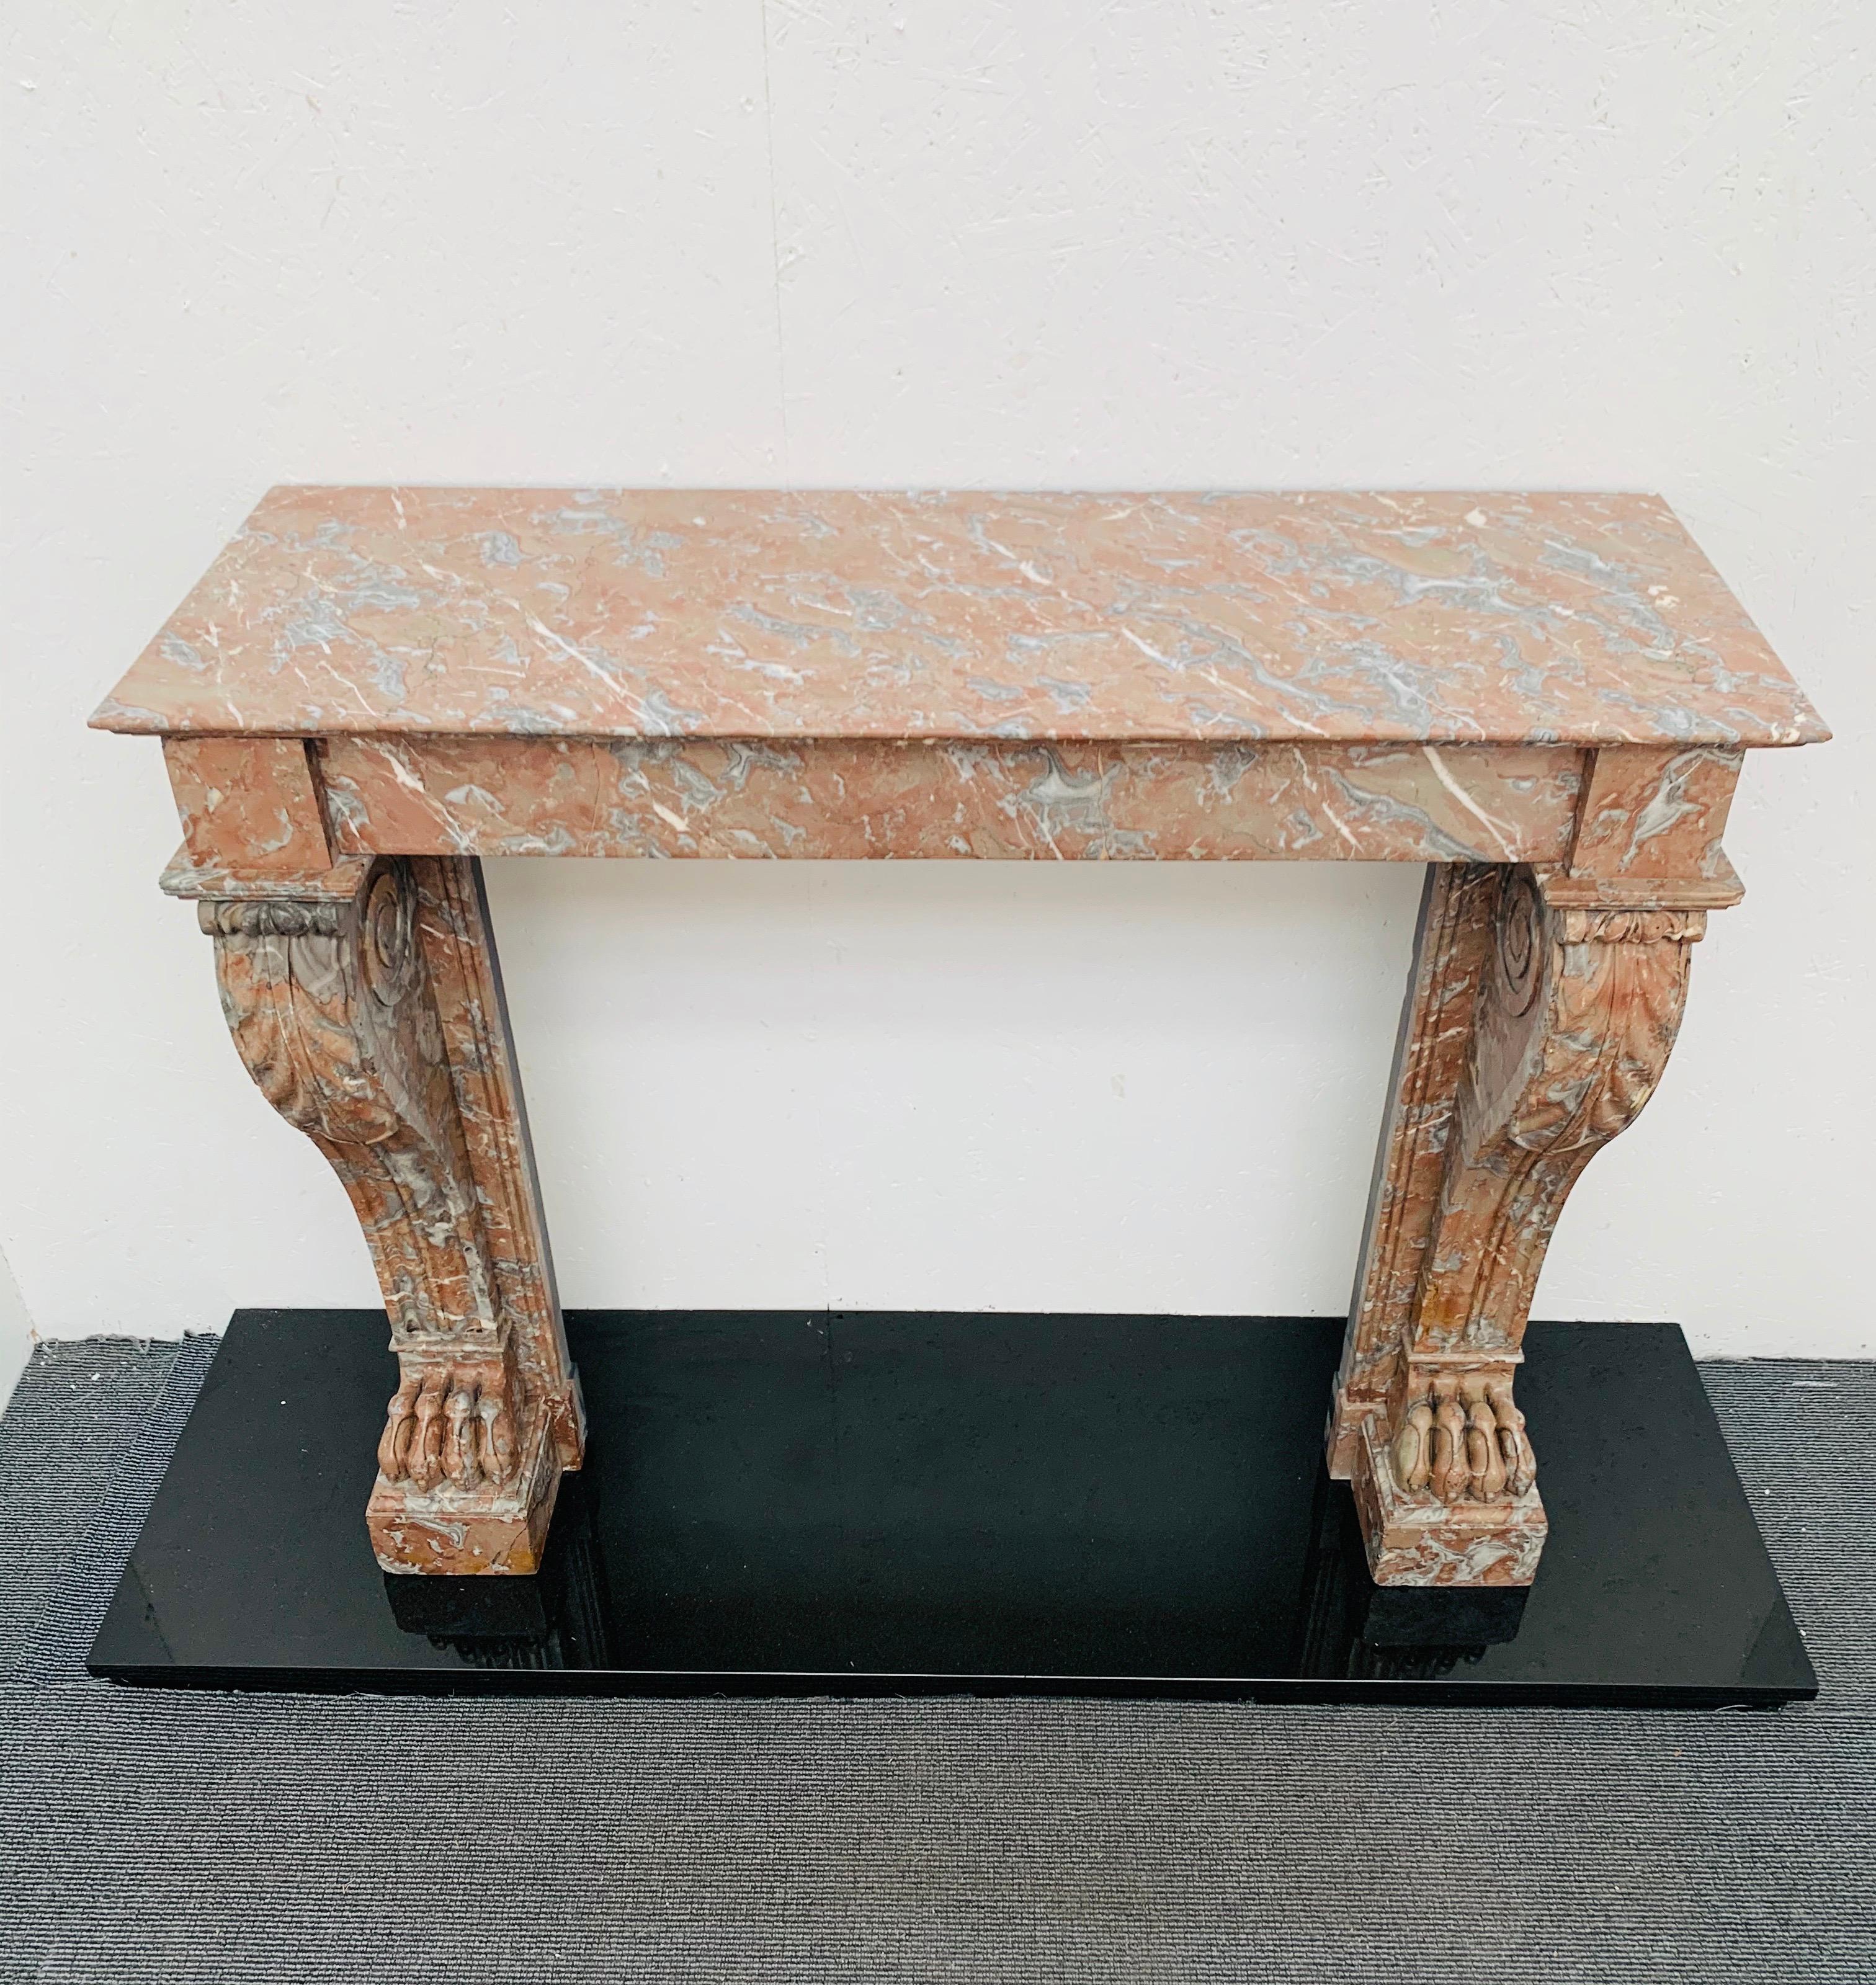 19th century French Louis Philippe I Rouge marble fireplace mantel (fireplace)-piece.
With hand carved scrolled leaves on fluted jambs and claw carvings on base of each foot block. In good condition, recently salvaged from a London period town